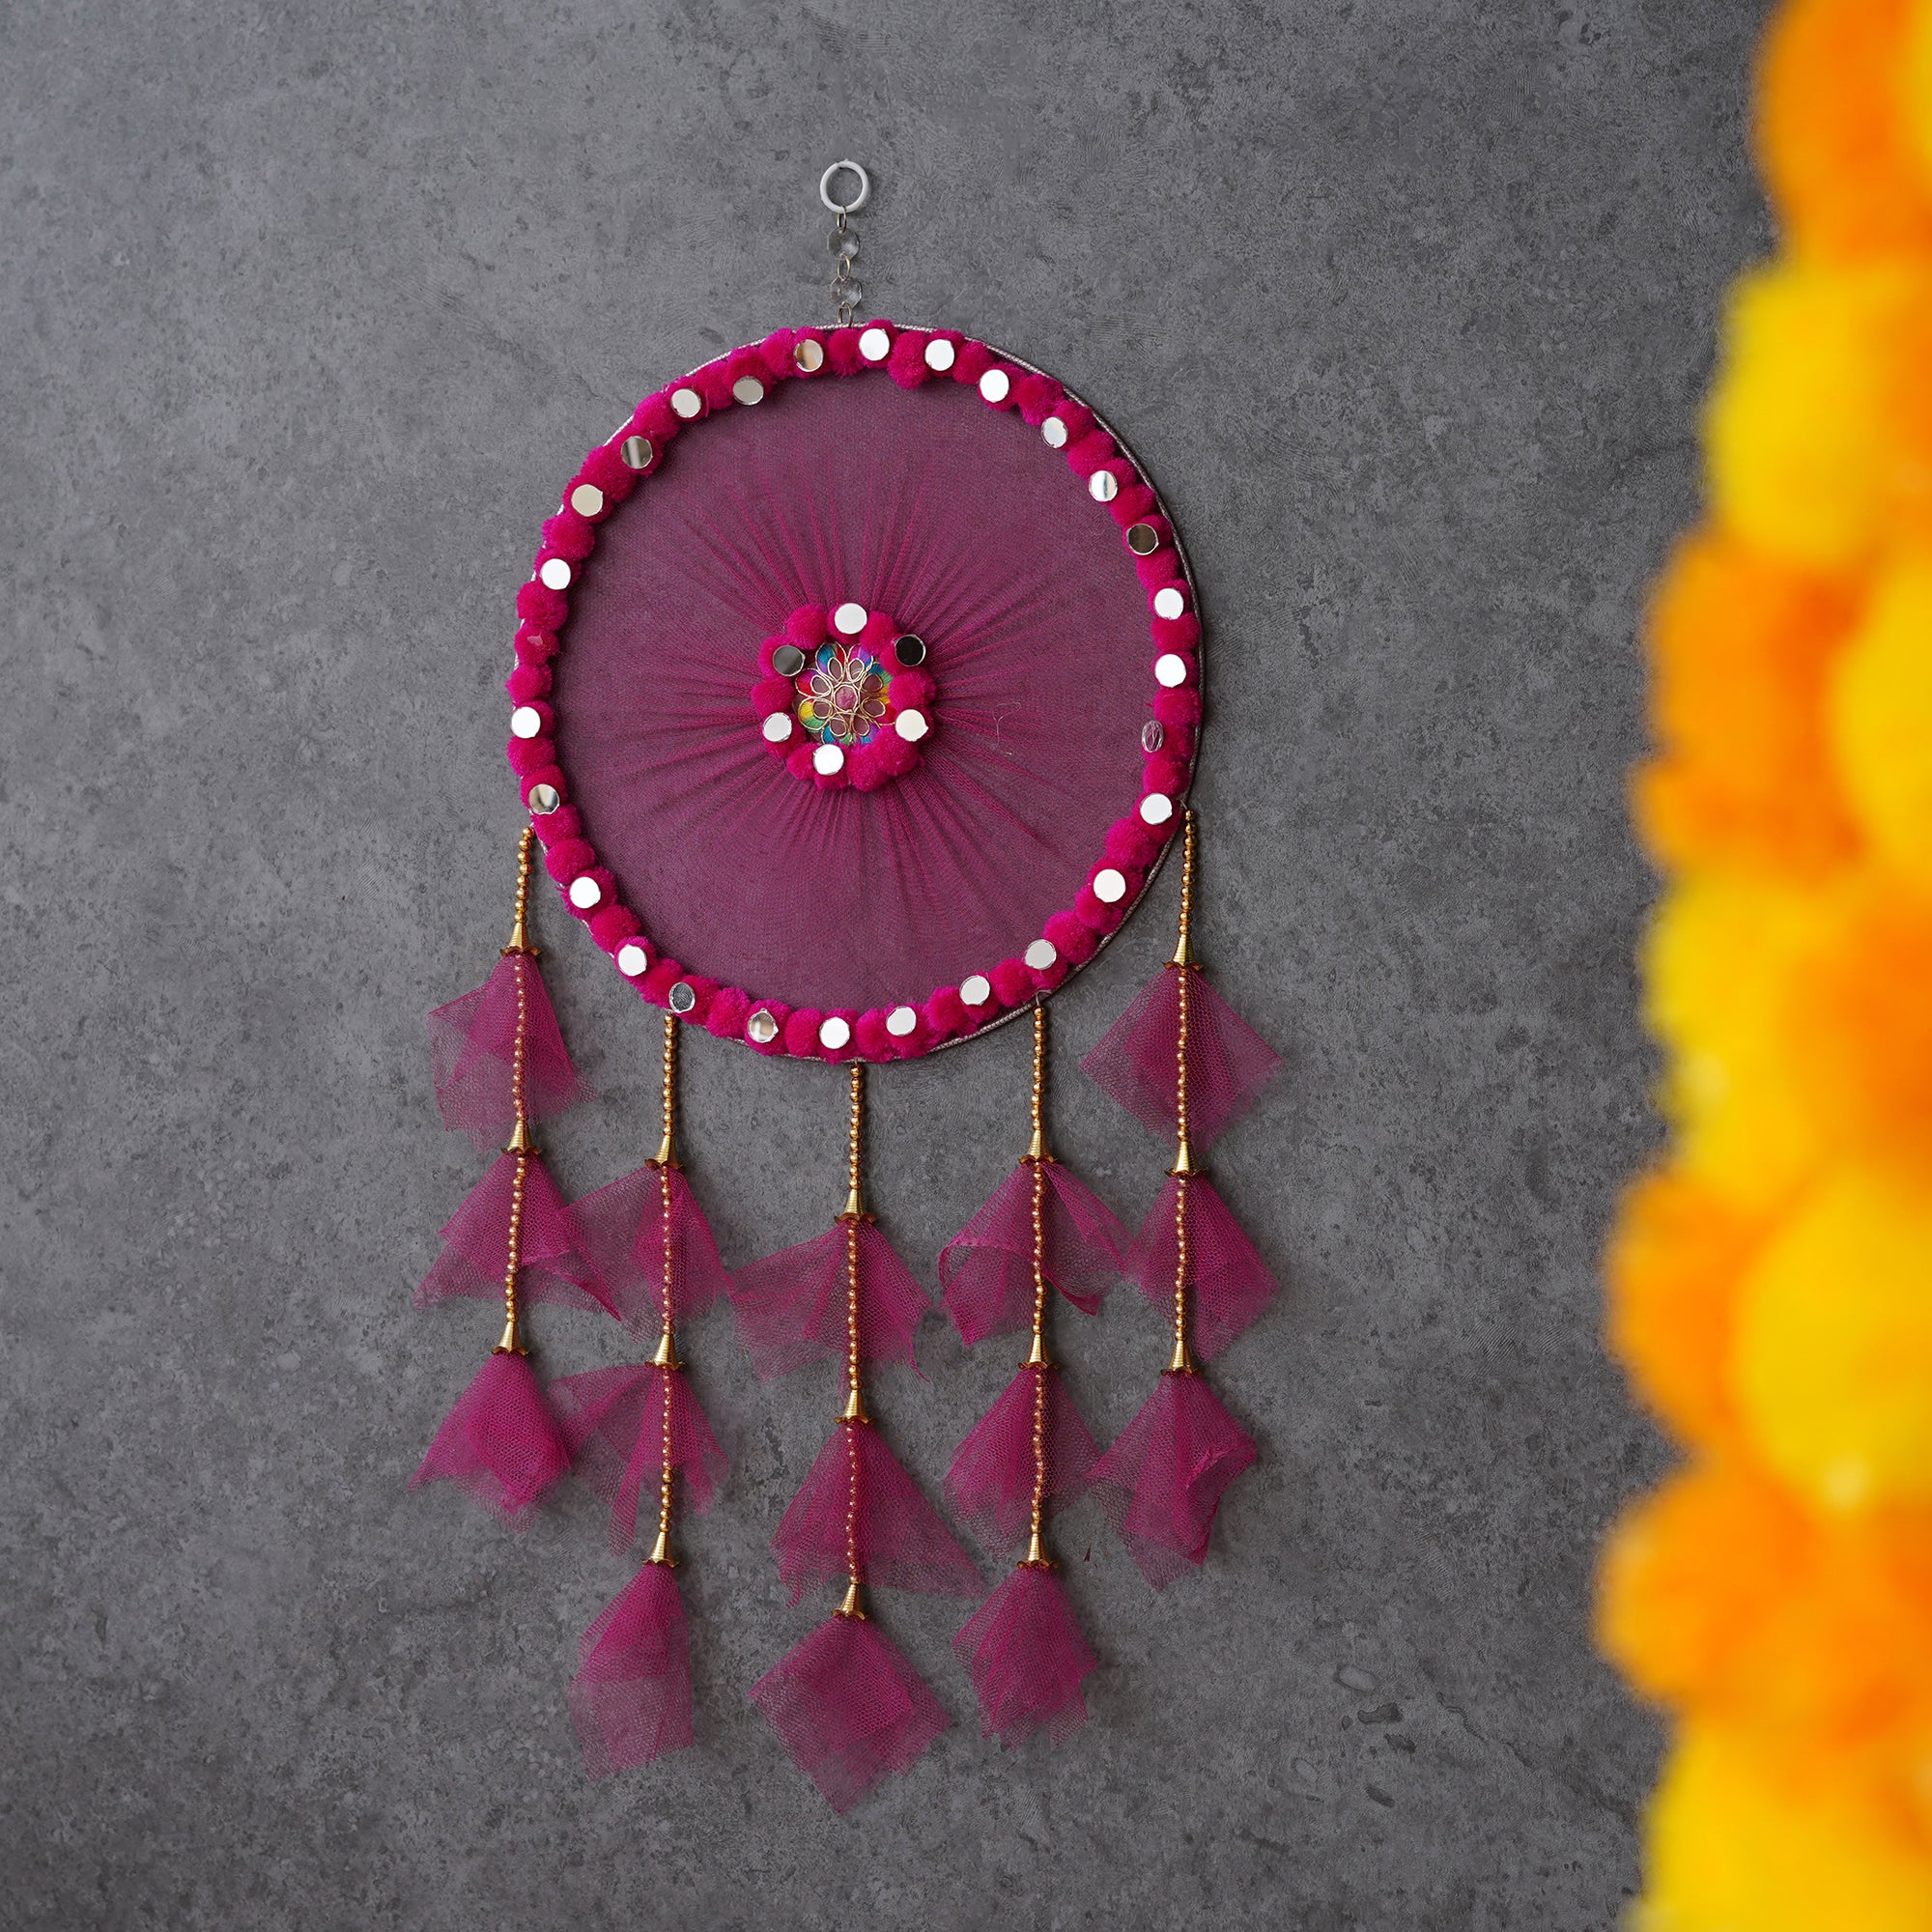 eCraftIndia Pink Wall Hanging Dream Catcher For Home Decor - Perfect Window, Bedroom, Living Room, Wall Decoration Item 4